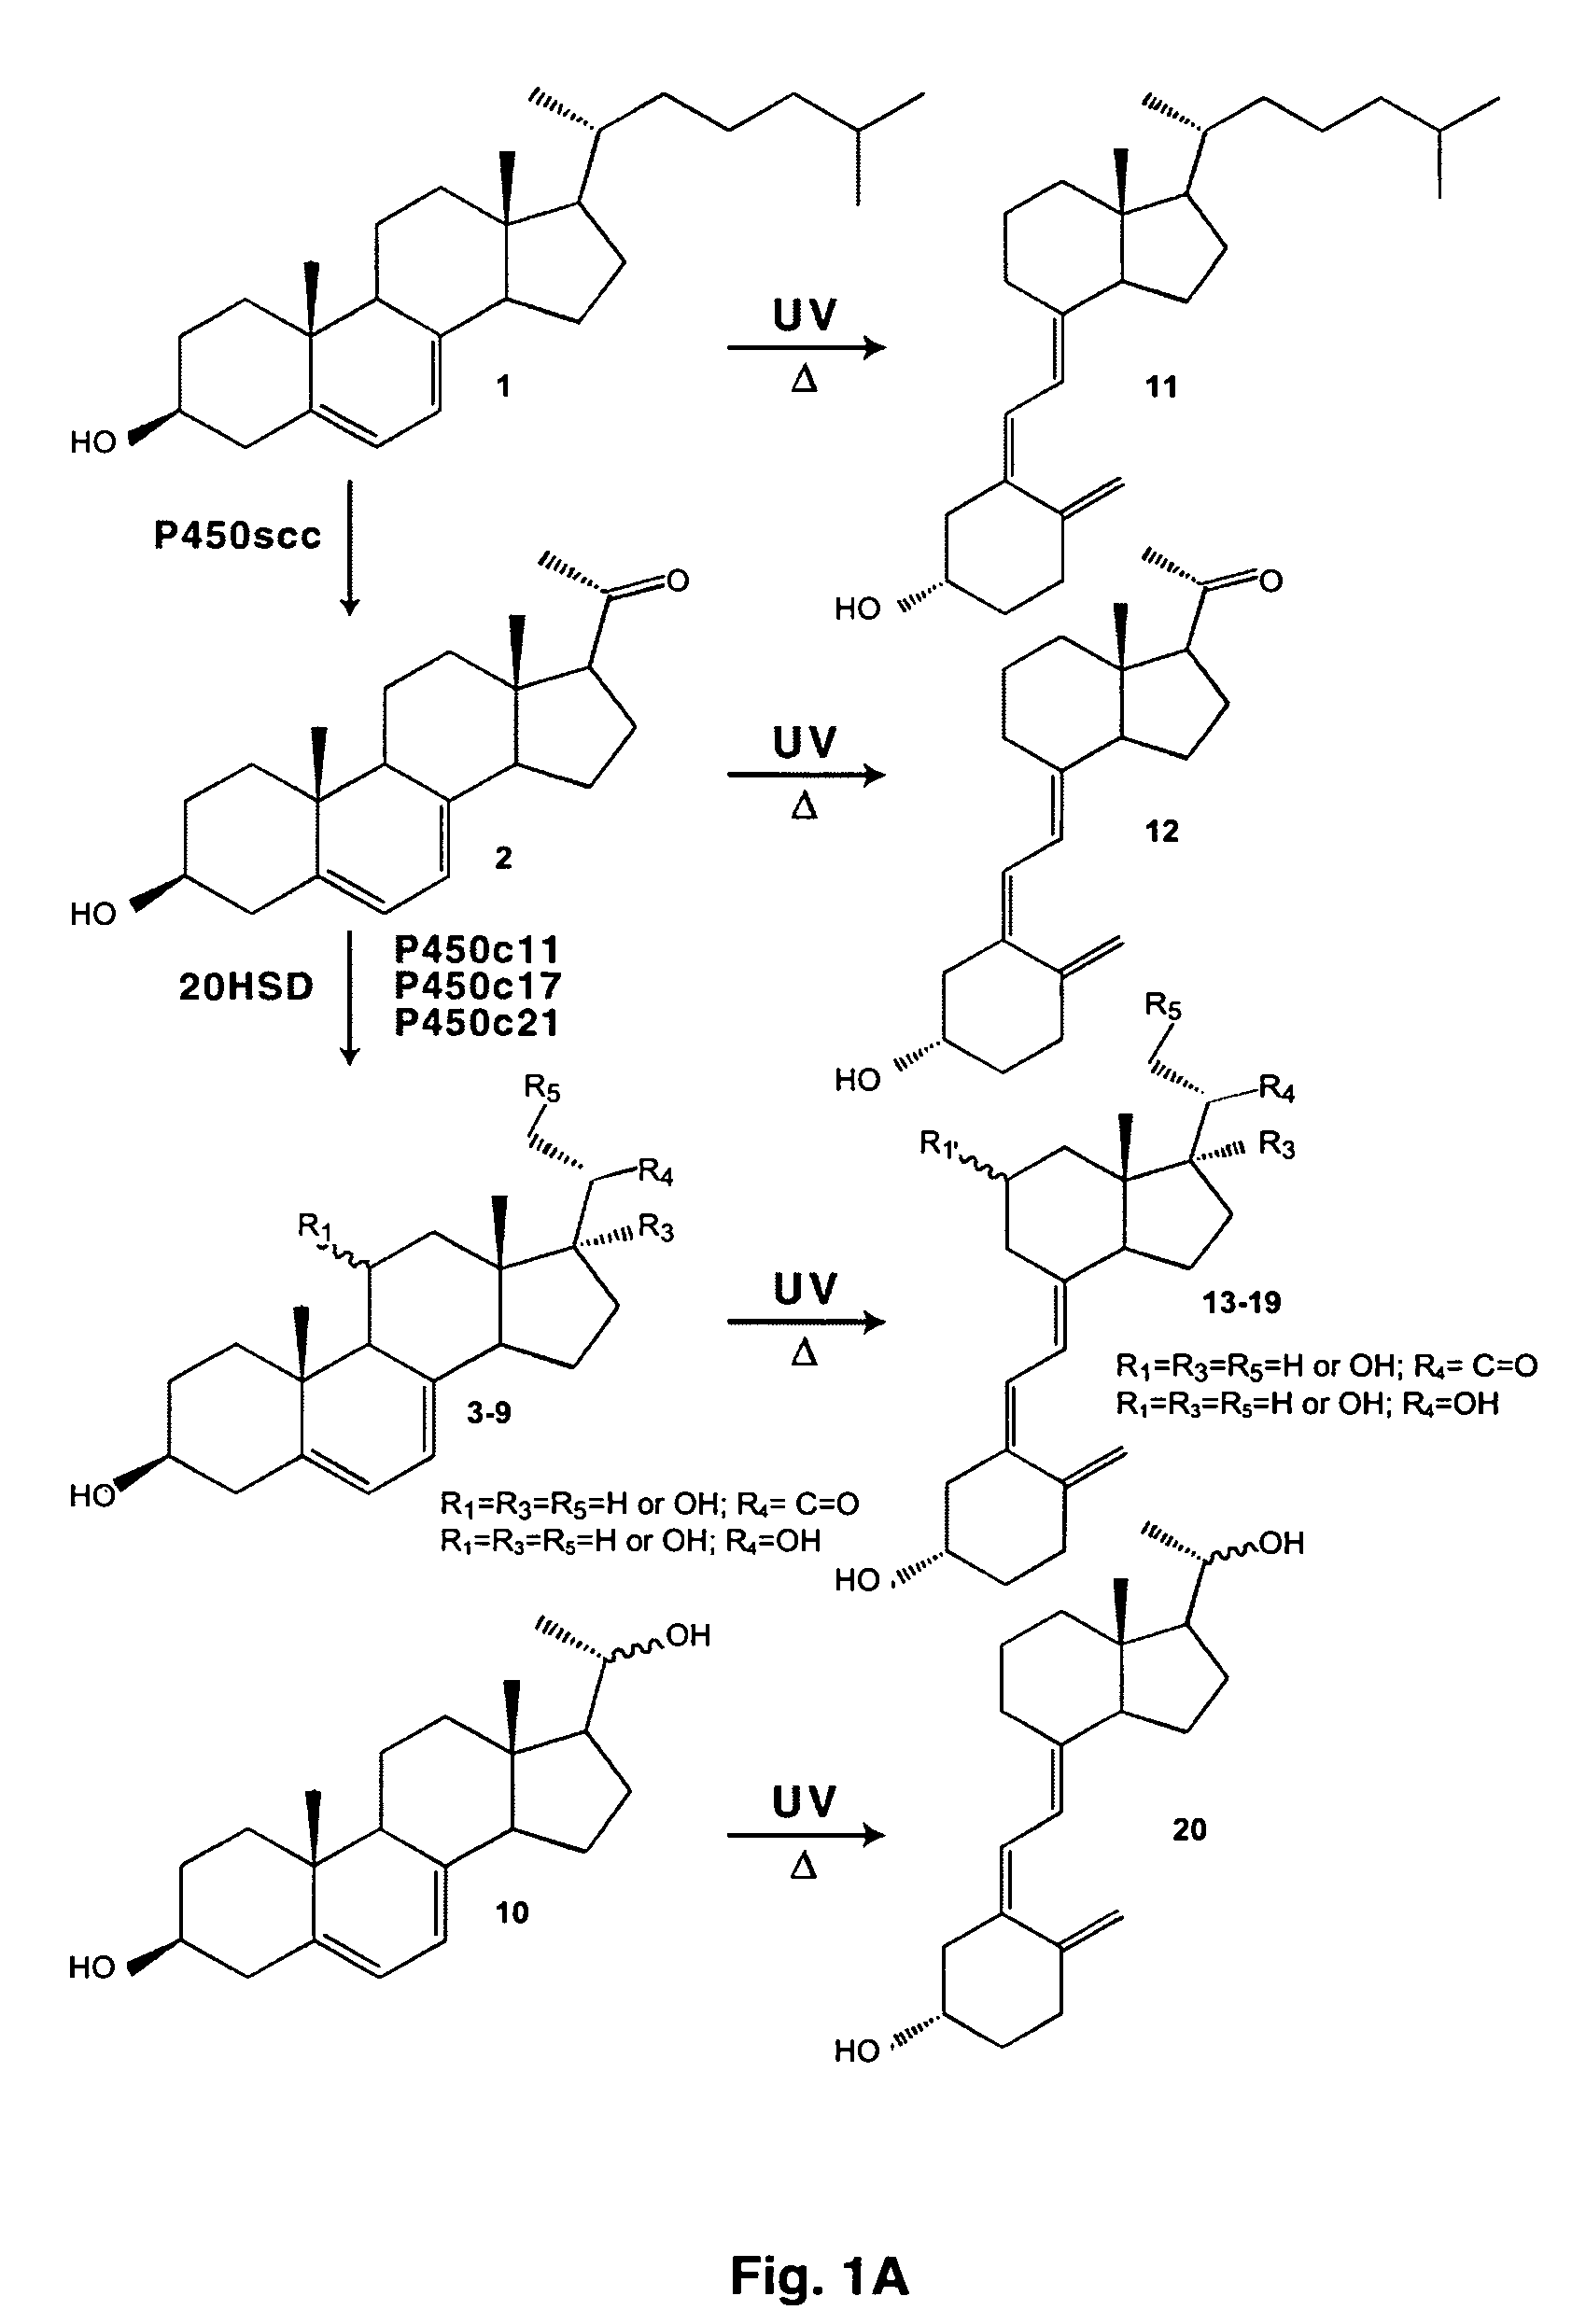 Enzymatic method to produce 7-dehydropregnenolone, vitamin D3-like compounds and derivatives thereof